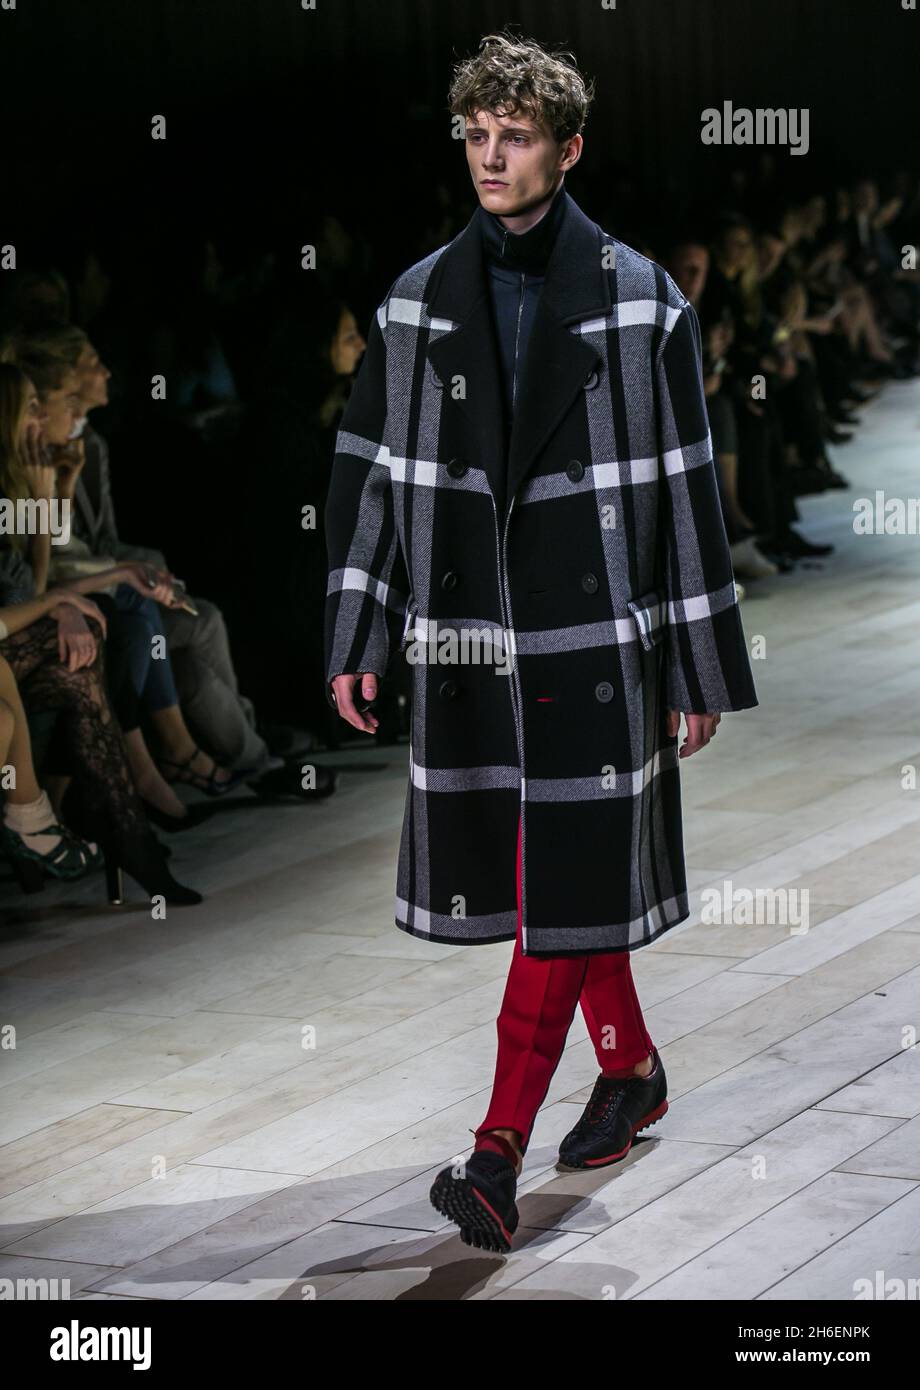 Models on the catwalk the Burberry 2016 Fashion Week show at Albert Lawn, London Stock Photo - Alamy